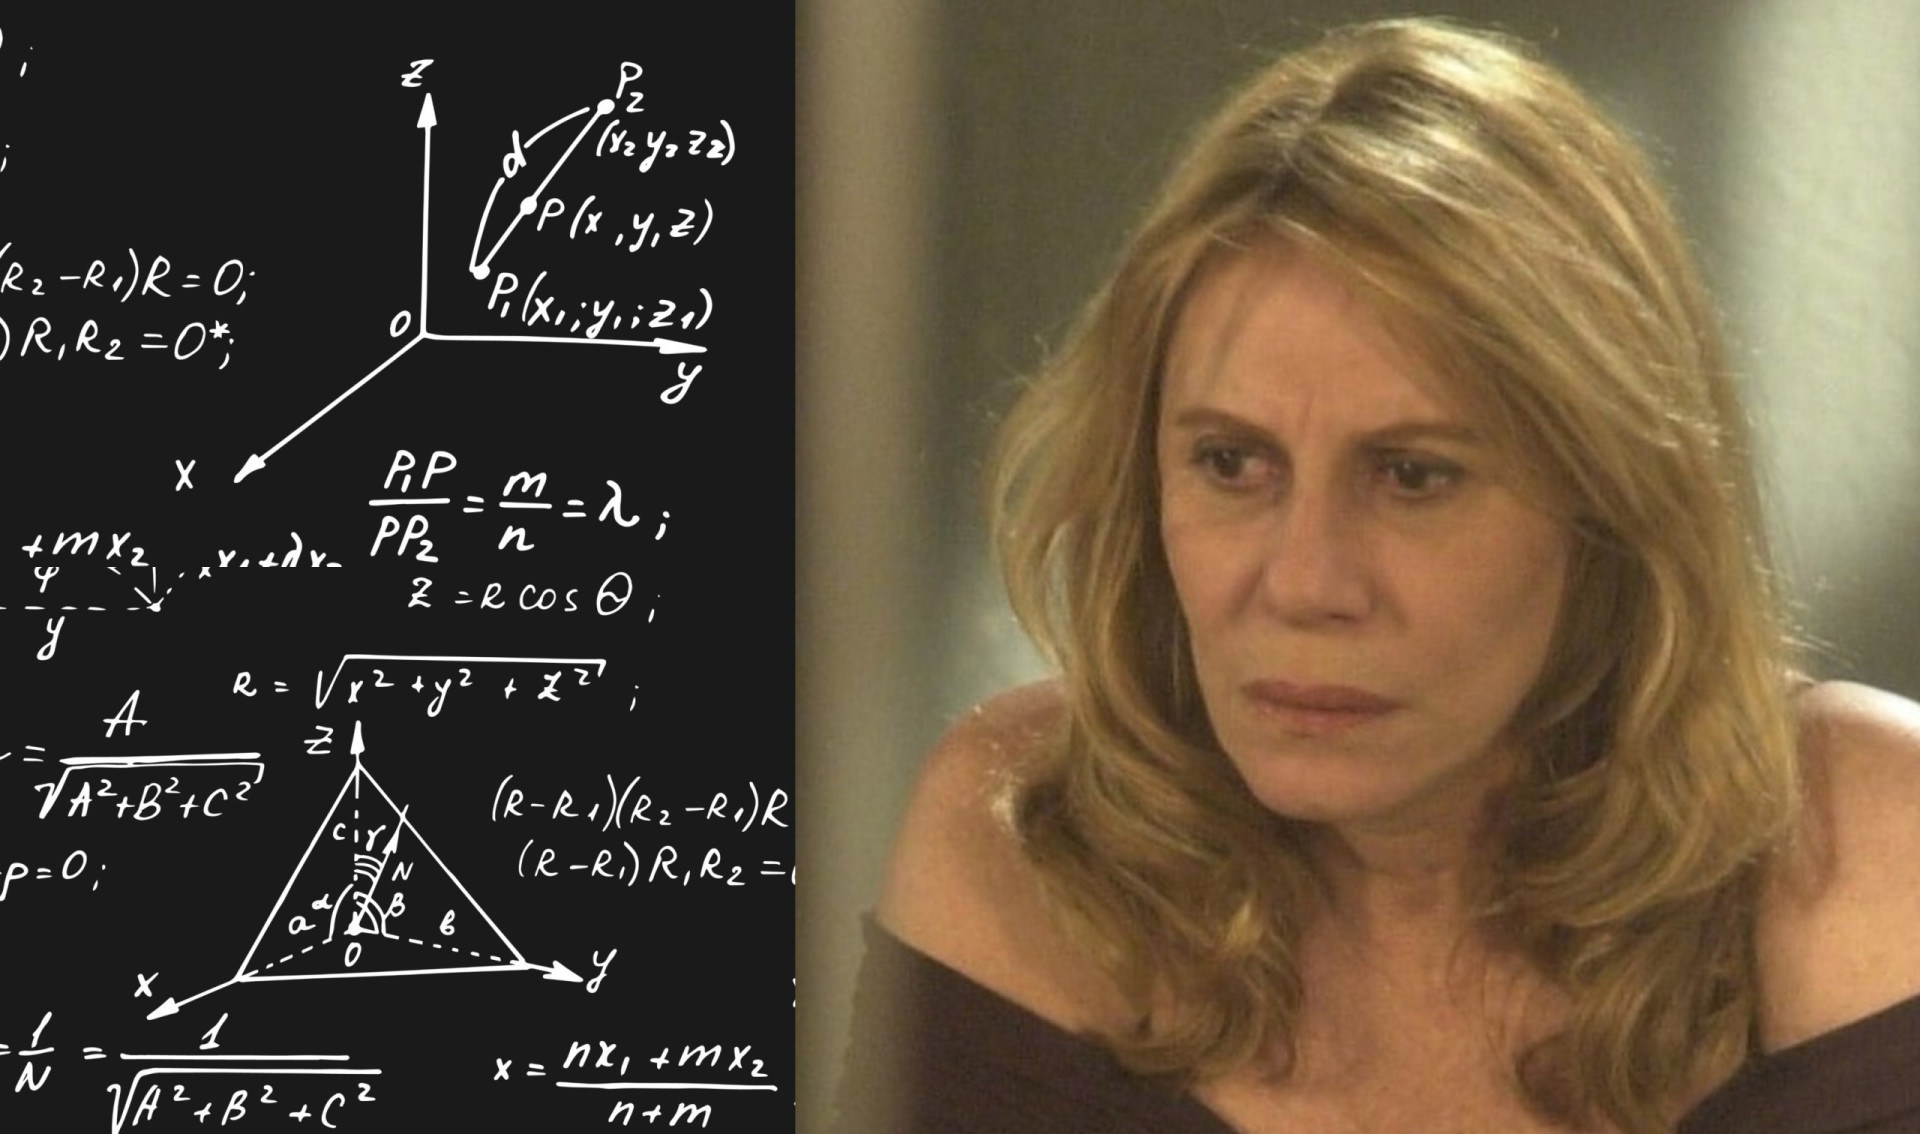 Everything you need to know about the confused math lady